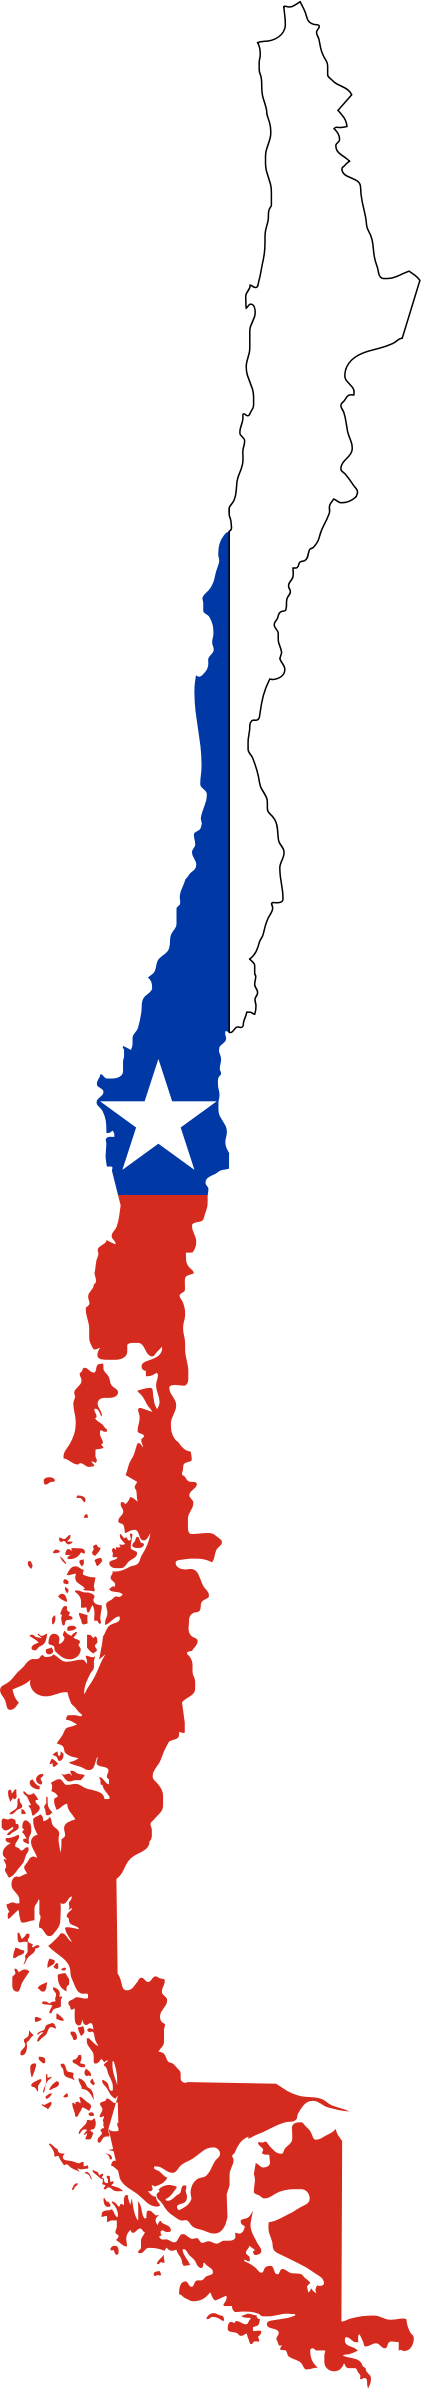 Chile Flag Map PNG image